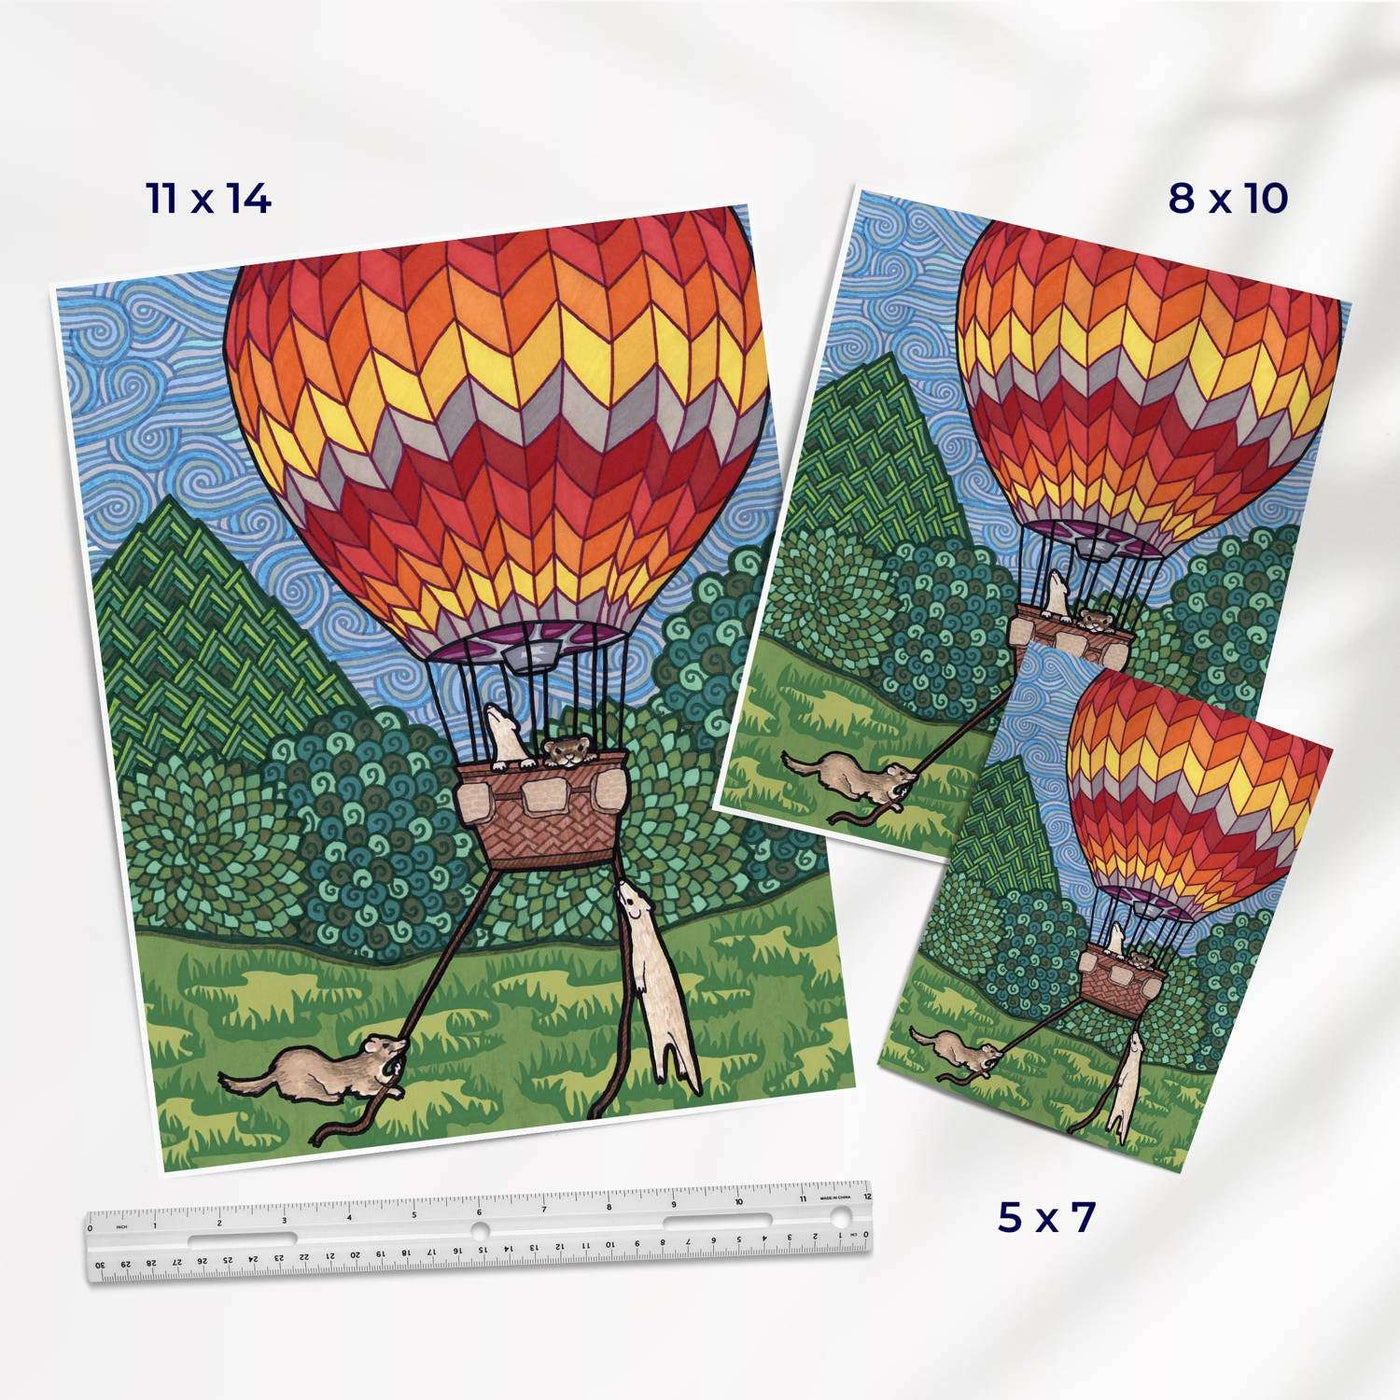 Various art print sizes showing a hot air balloon adventure ferret illustration in various sizes with a ruler for scale.